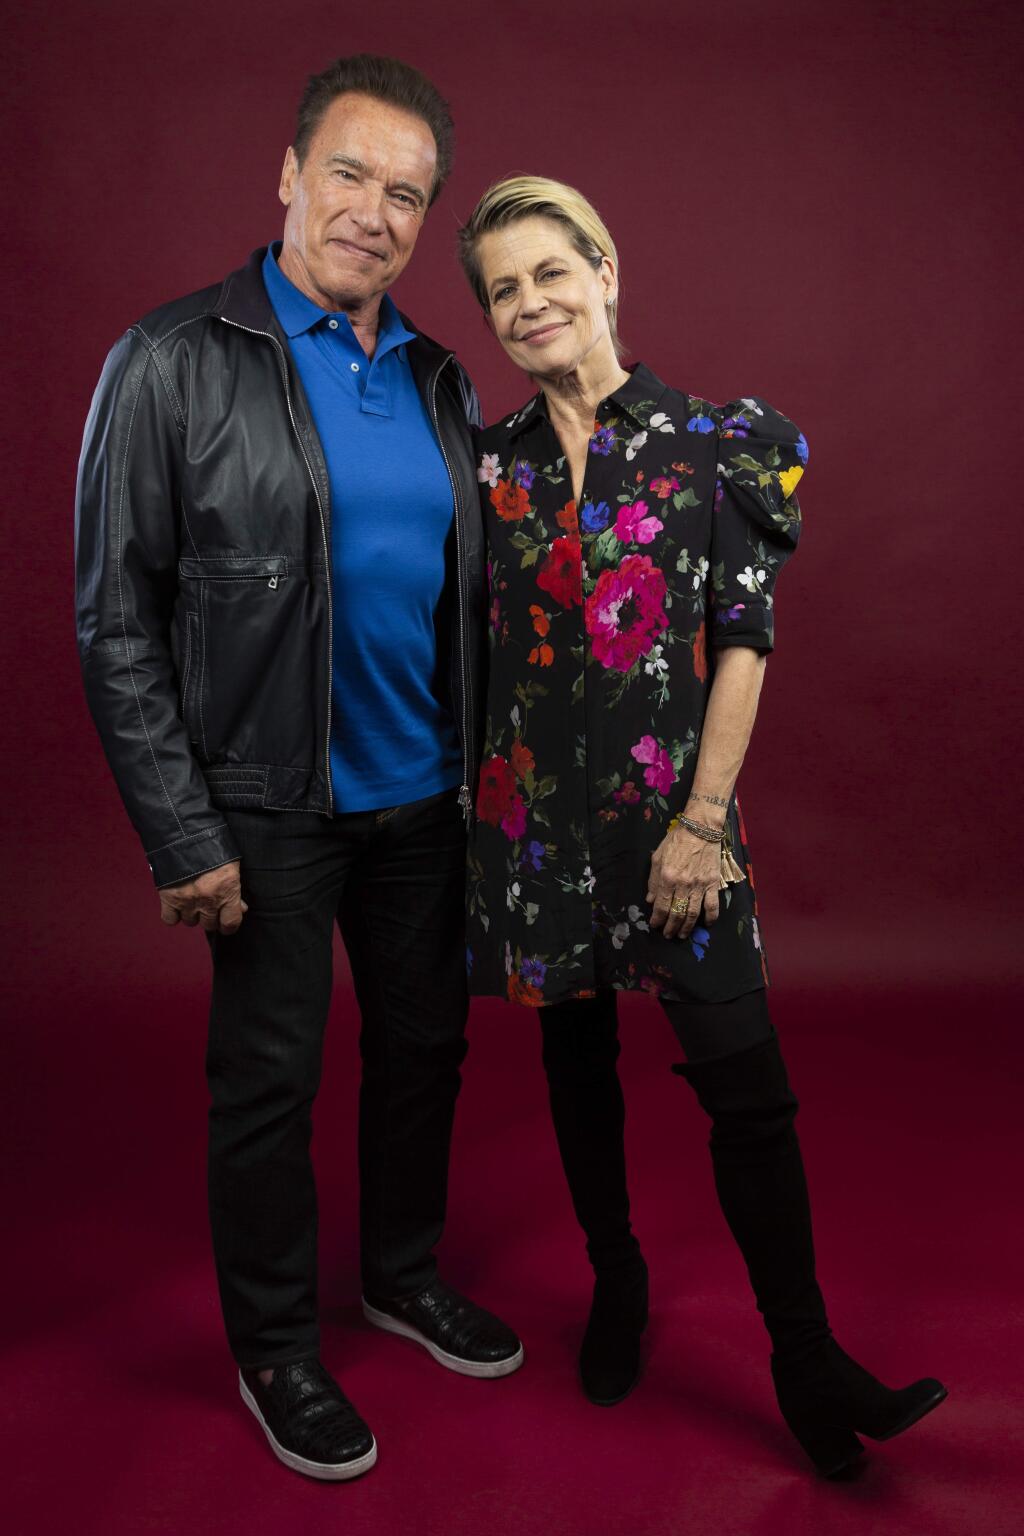 This Oct. 26, 2019 photo shows actor Arnold Schwarzenegger, left, and actress Linda Hamilton posing for a portrait to promote the film, 'Terminator: Dark Fate' at the Four Seasons Hotel Los Angeles at Beverly Hills in Los Angeles. (Photo by Willy Sanjuan/Invision/AP)